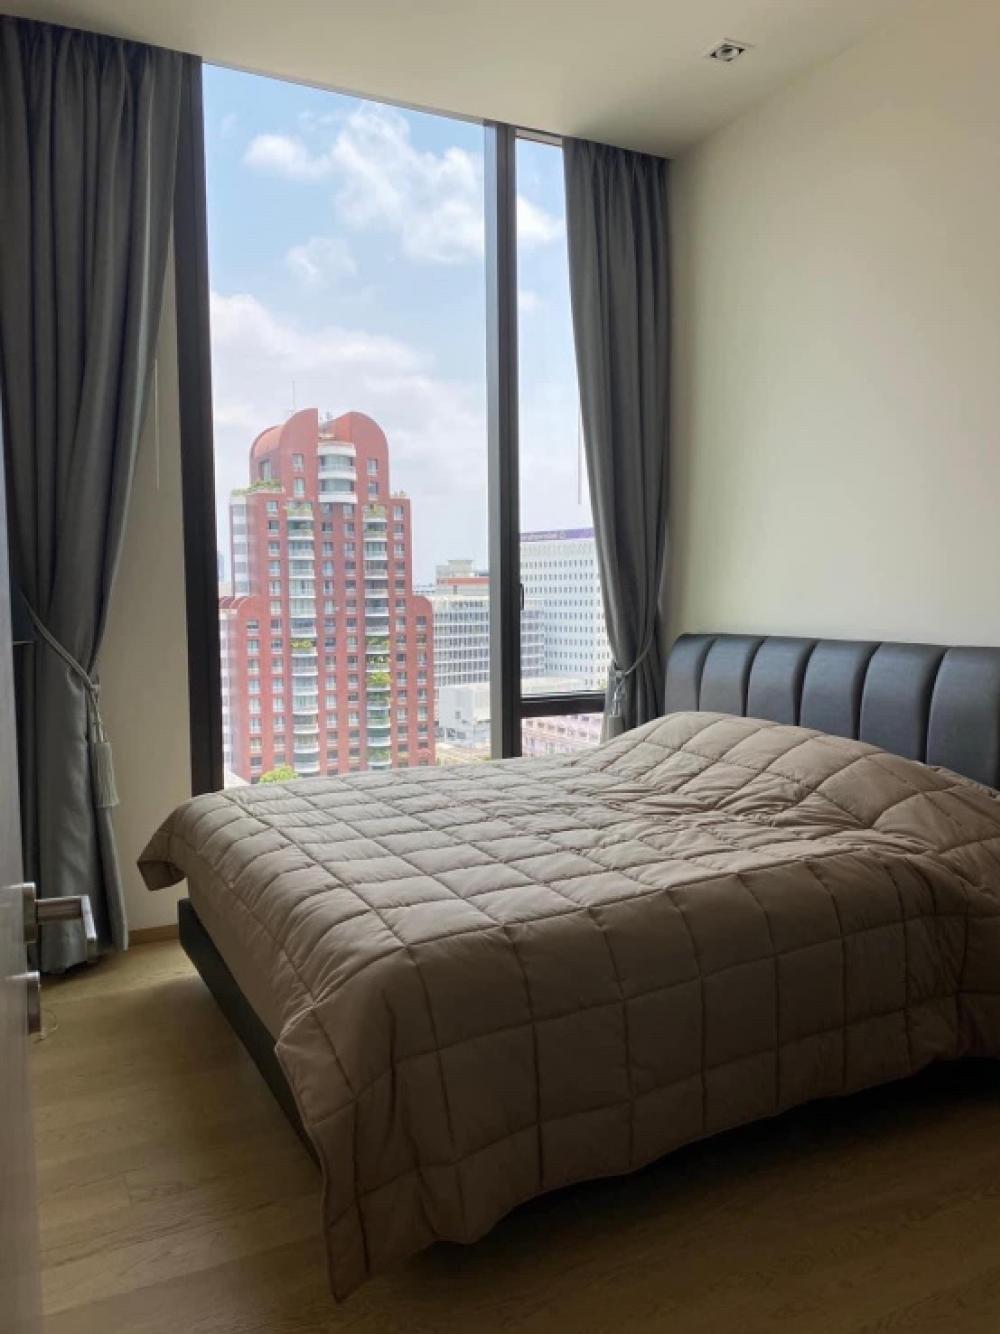 For RentCondoWitthayu, Chidlom, Langsuan, Ploenchit : Condo for rent 🔥 28 Chidlom 🔥 Floor 10 🔥 74 sq m. 🔥 2Bed 🔥 Beautiful city view 🔥 Fully furnished and appliances 🔥 R300866-06